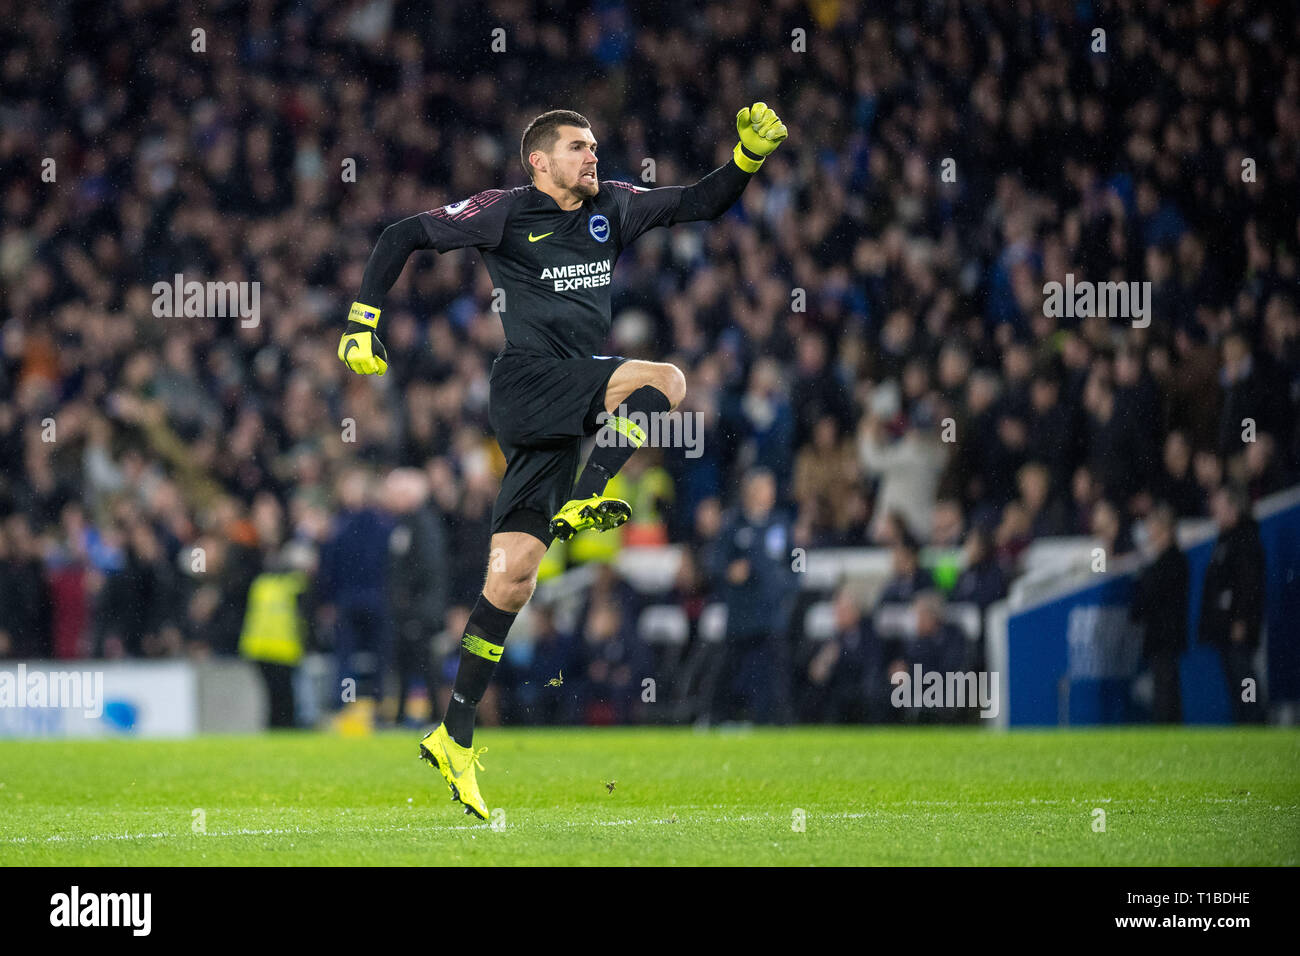 BRIGHTON, ENGLAND - DECEMBER 04: Mathew Ryan of  Brighton & Hove Albion celebrate he's team 1st goal during the Premier League match between Brighton & Hove Albion and Crystal Palace at American Express Community Stadium on December 4, 2018 in Brighton, United Kingdom. (Photo by Sebastian Frej/MB Media) Stock Photo